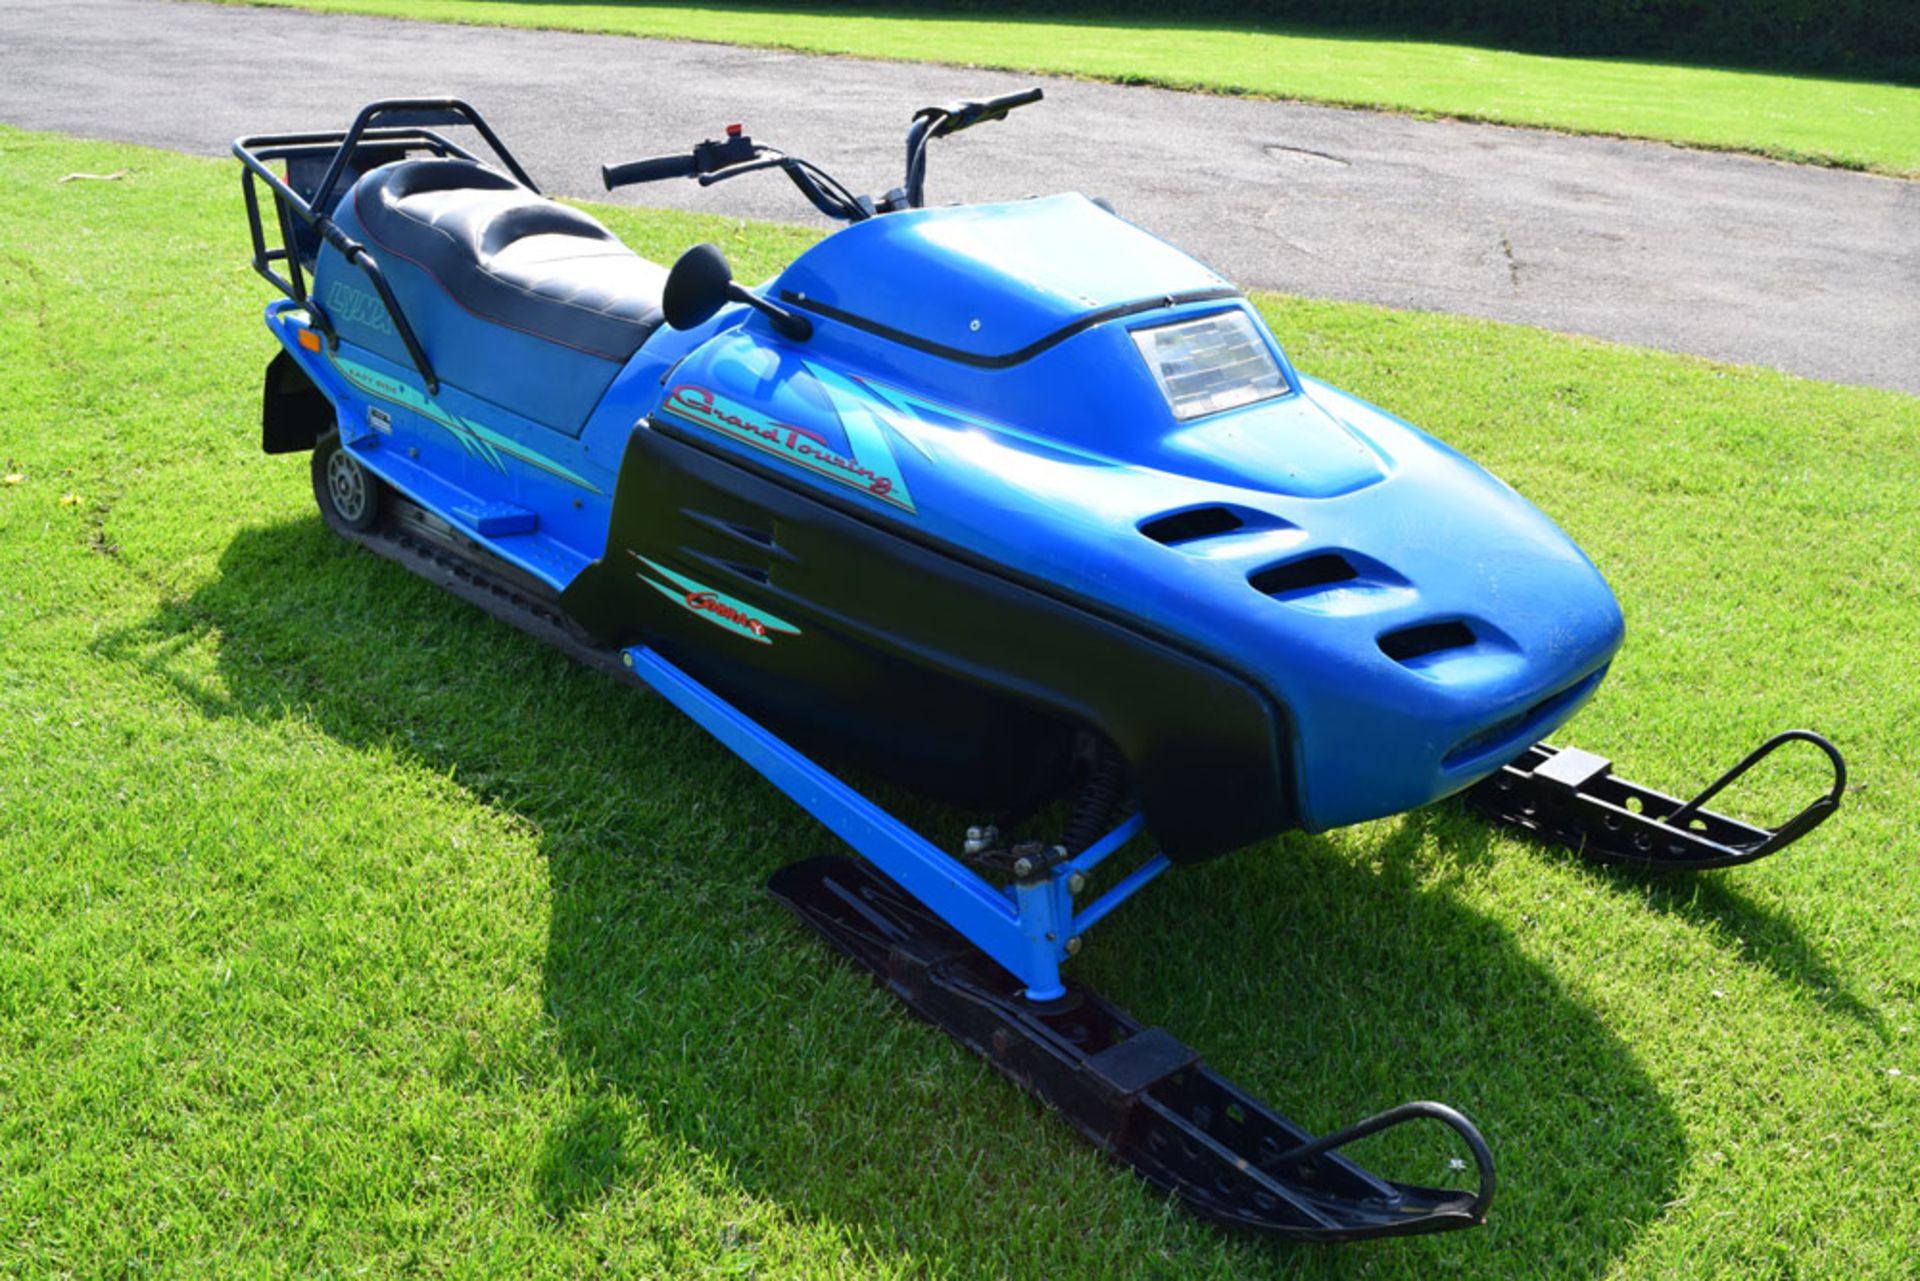 Cobra Lynx Grand Touring Electric Snow Mobile - Image 10 of 10